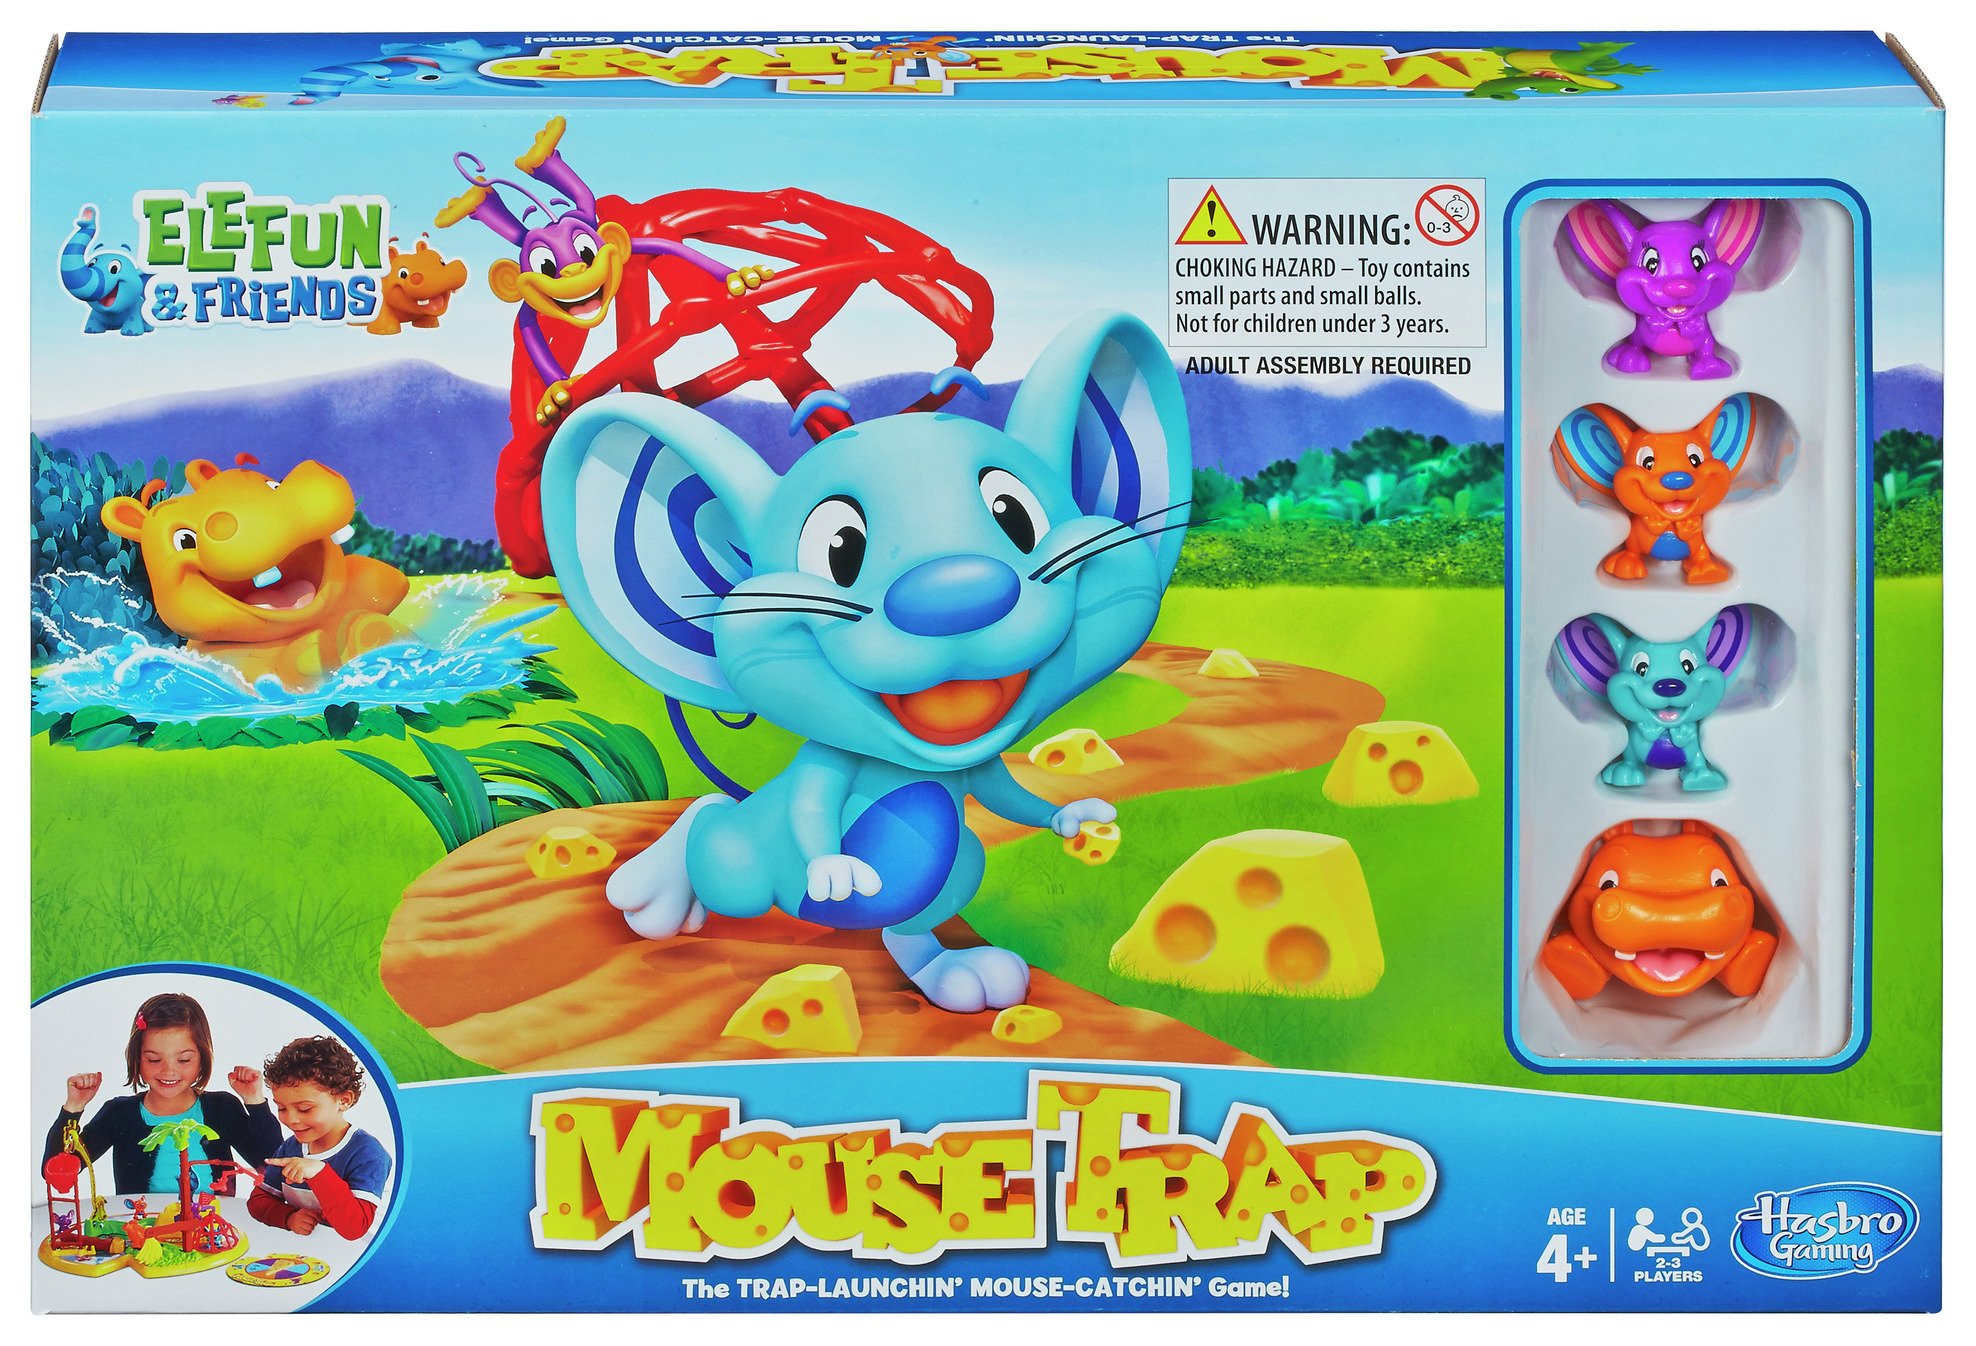 Elefun & Friends Mousetrap from Hasbro Gaming